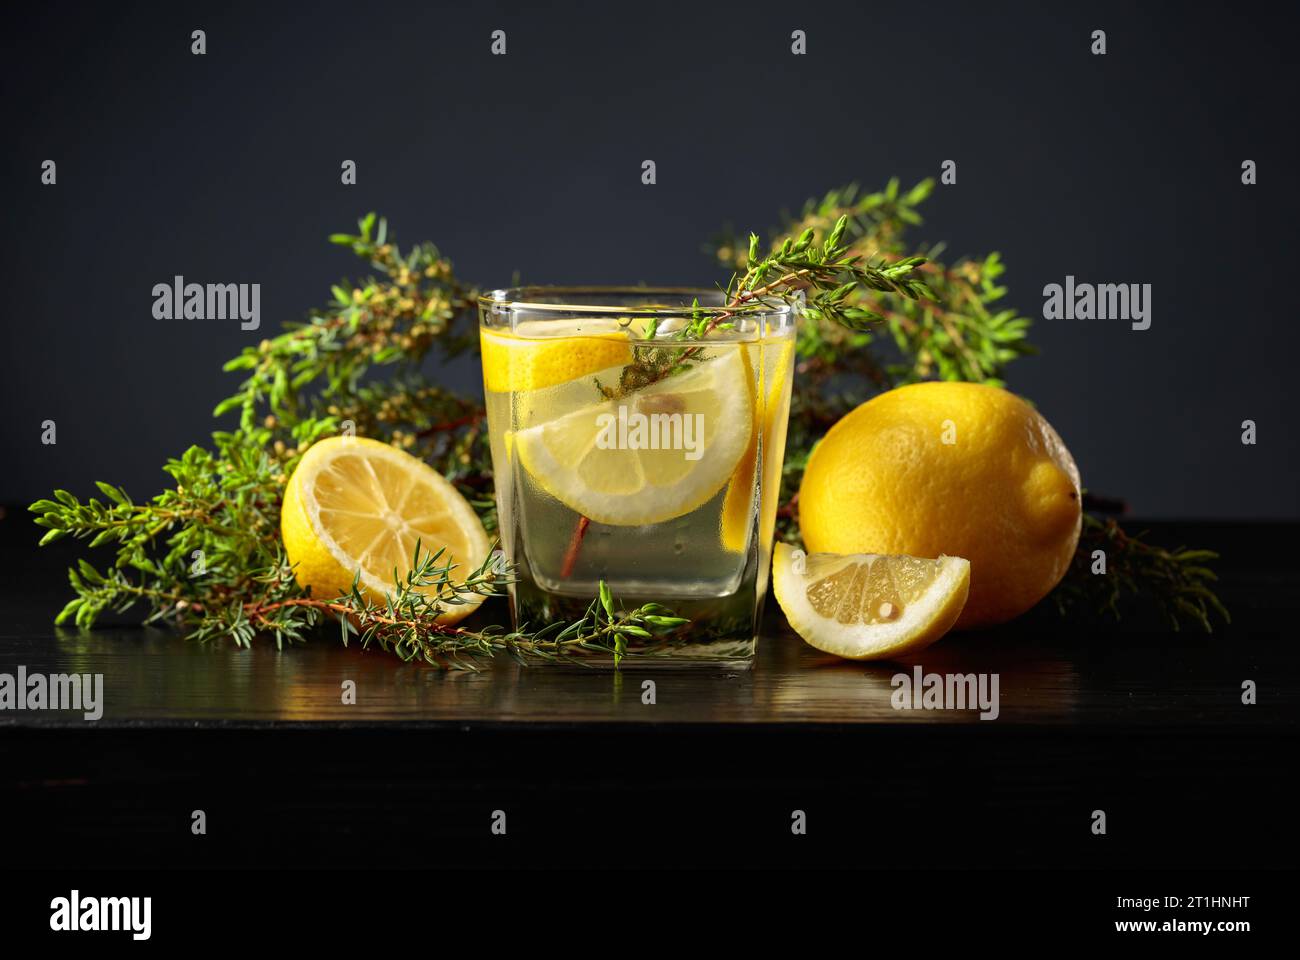 Cocktail Gin-tonic with ice, lemon, and juniper branches on a black wooden table. Stock Photo